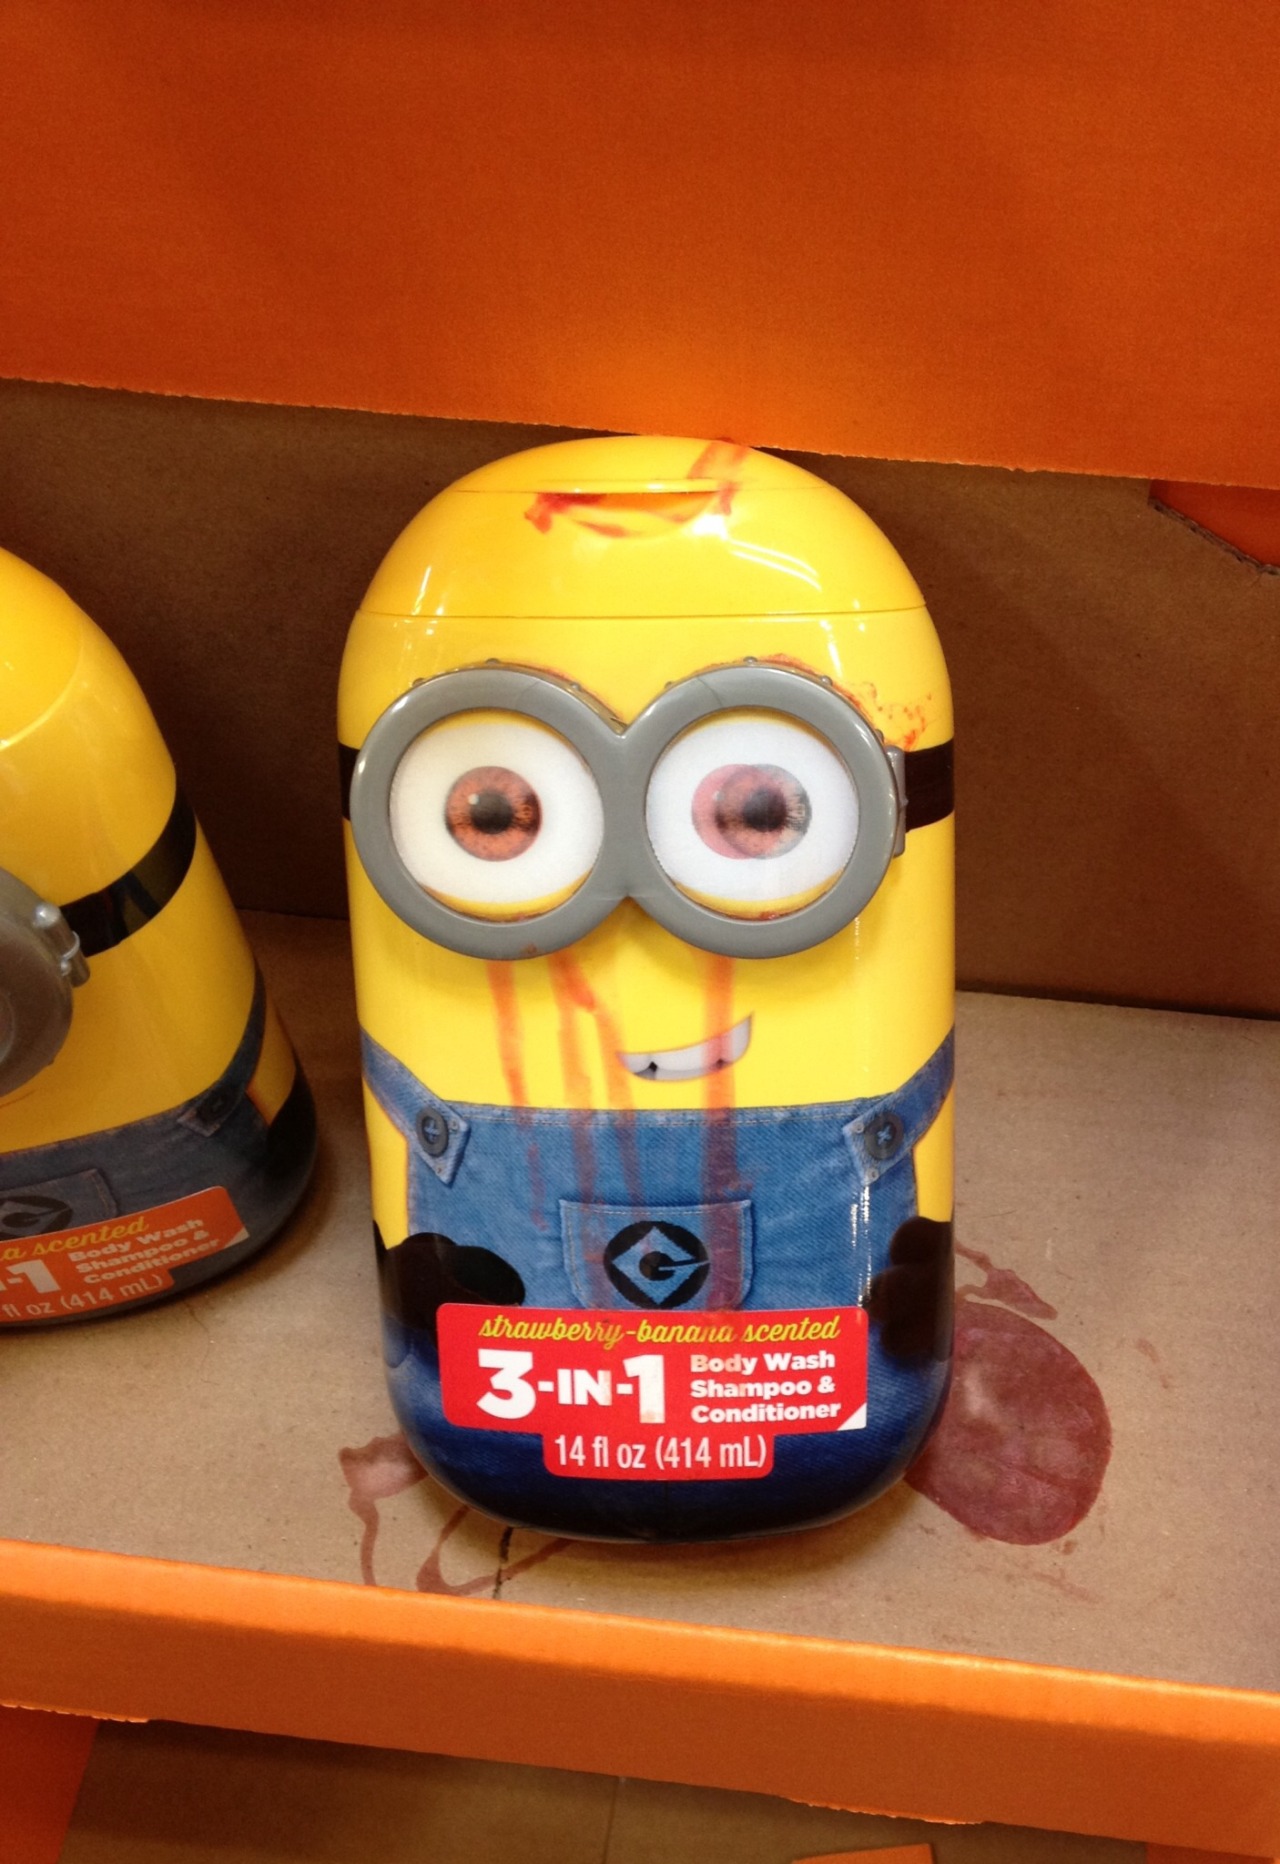 Minions are Terrible - Here's Why 8